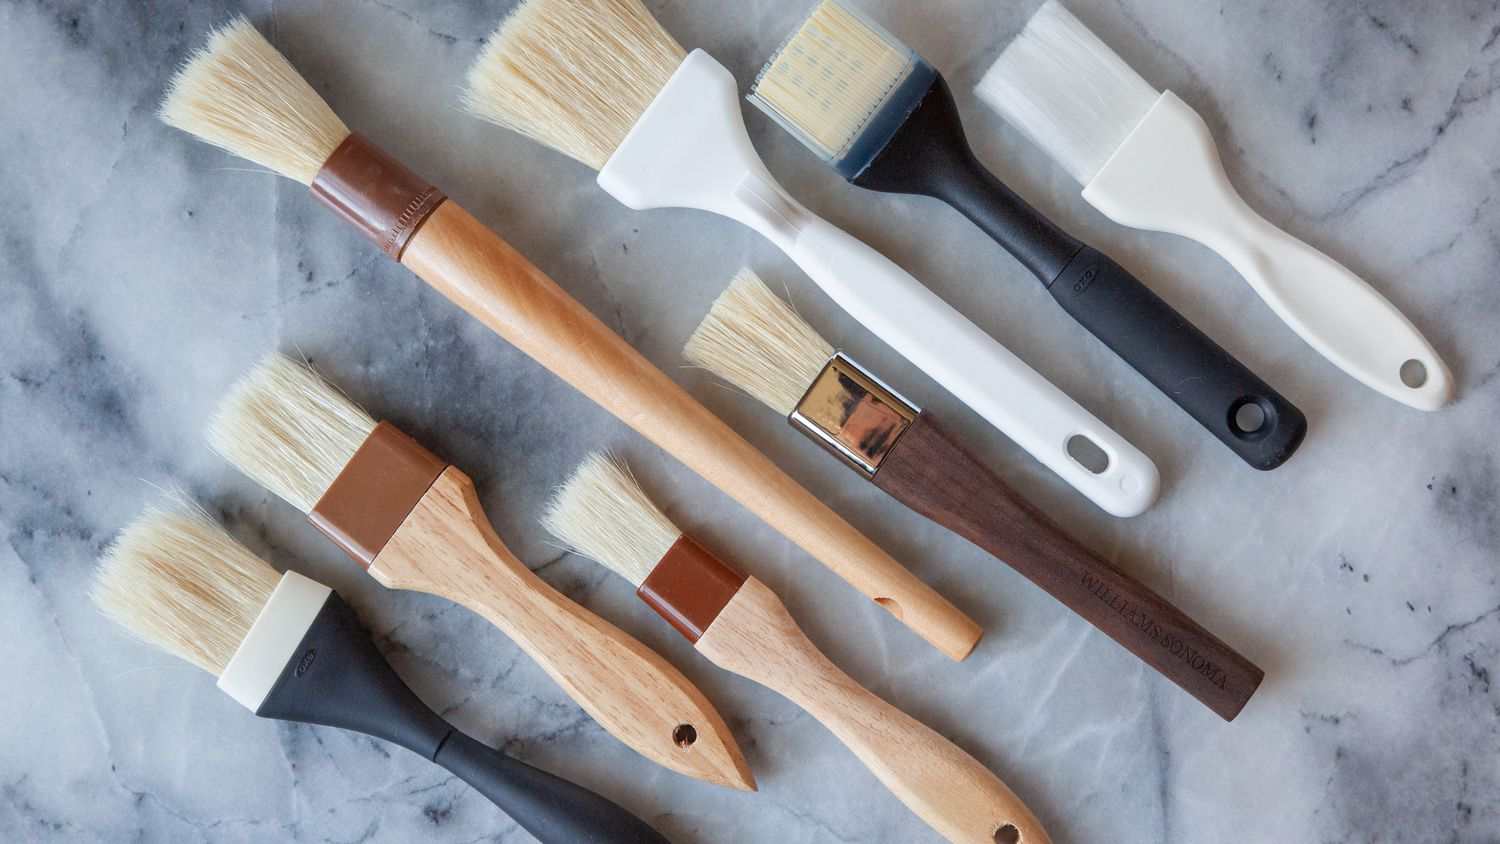 A pastry brush can be used as an alternative